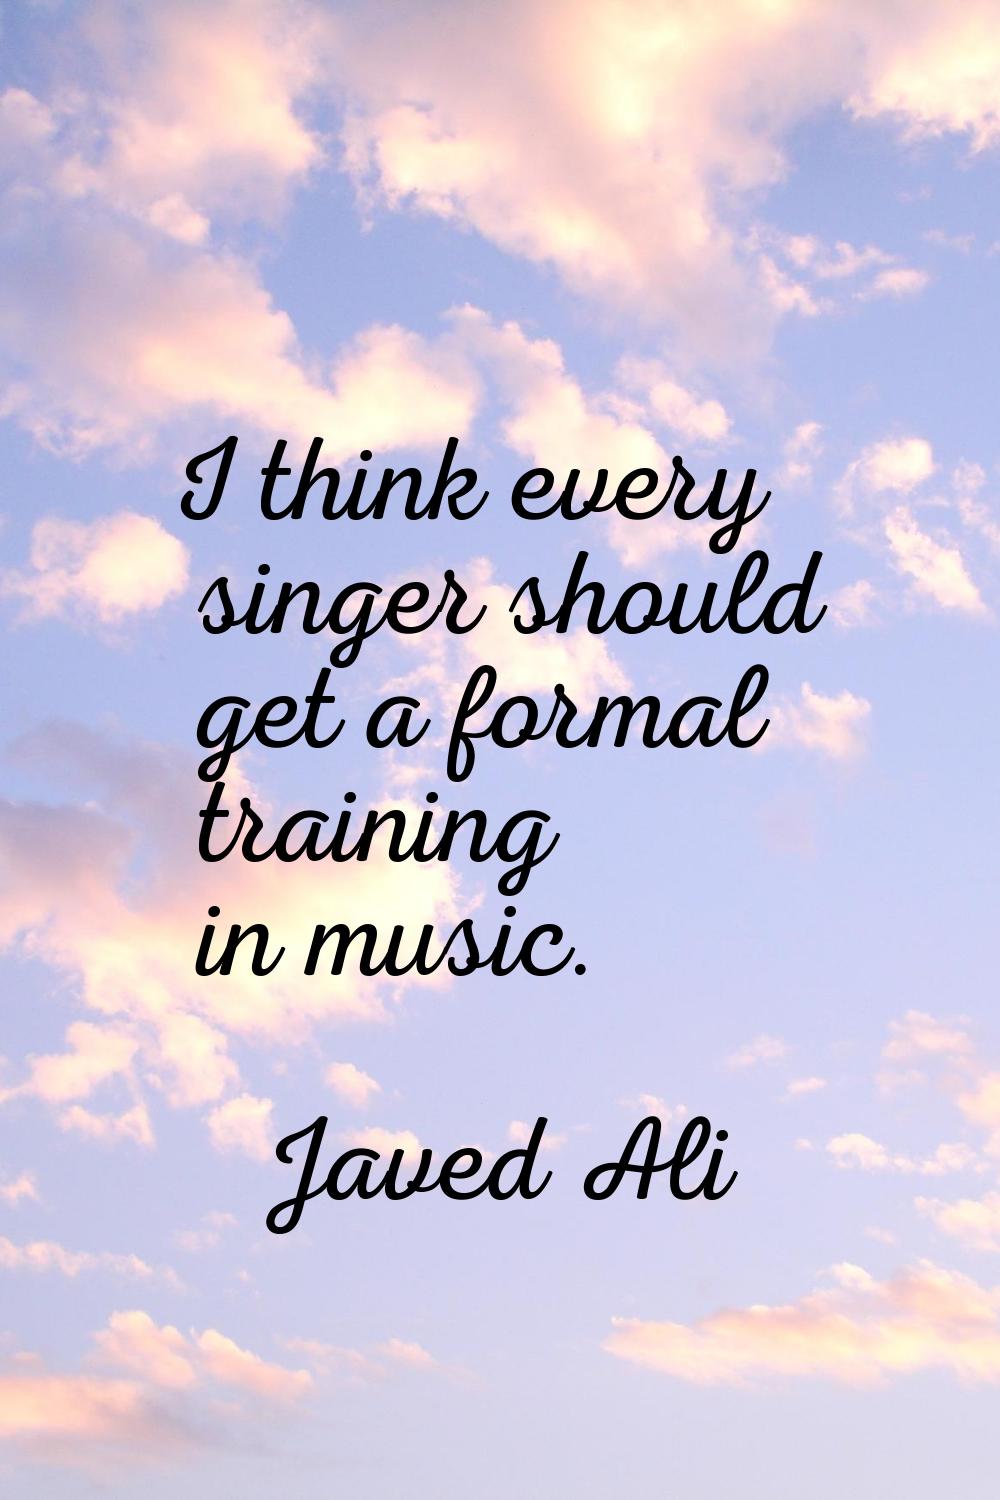 I think every singer should get a formal training in music.